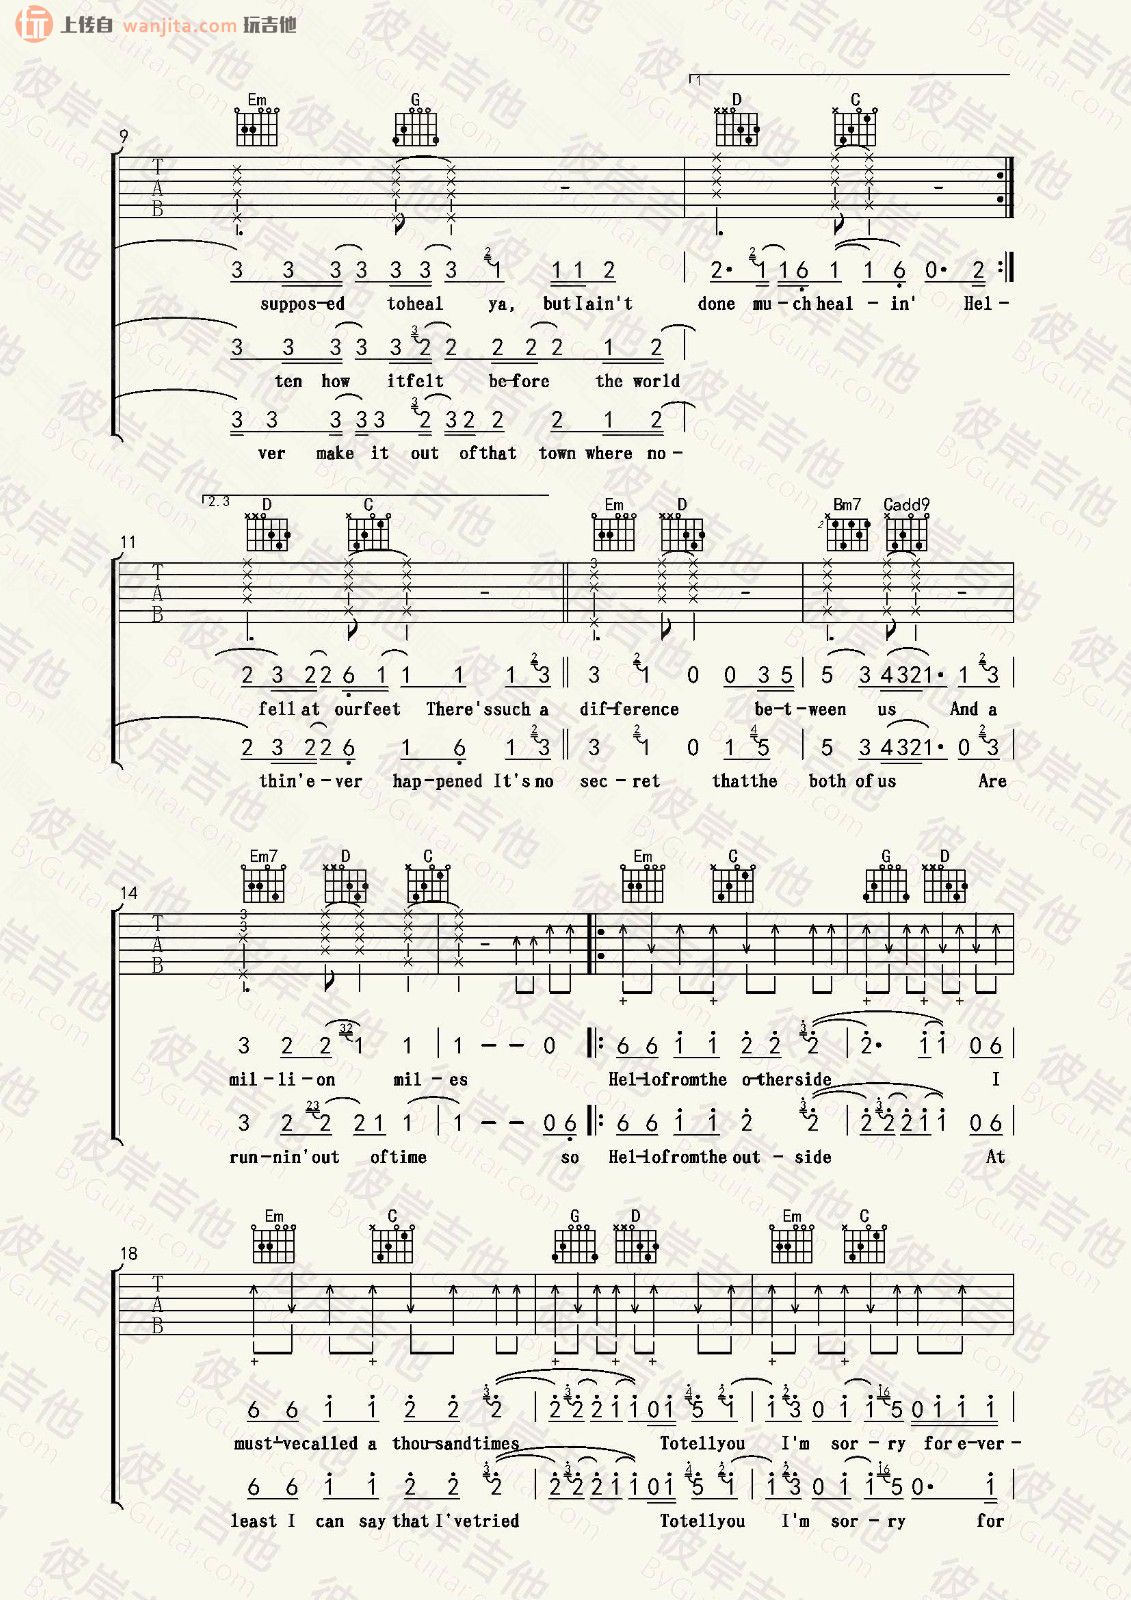 Hello for guitar. Guitar sheet music and tabs.